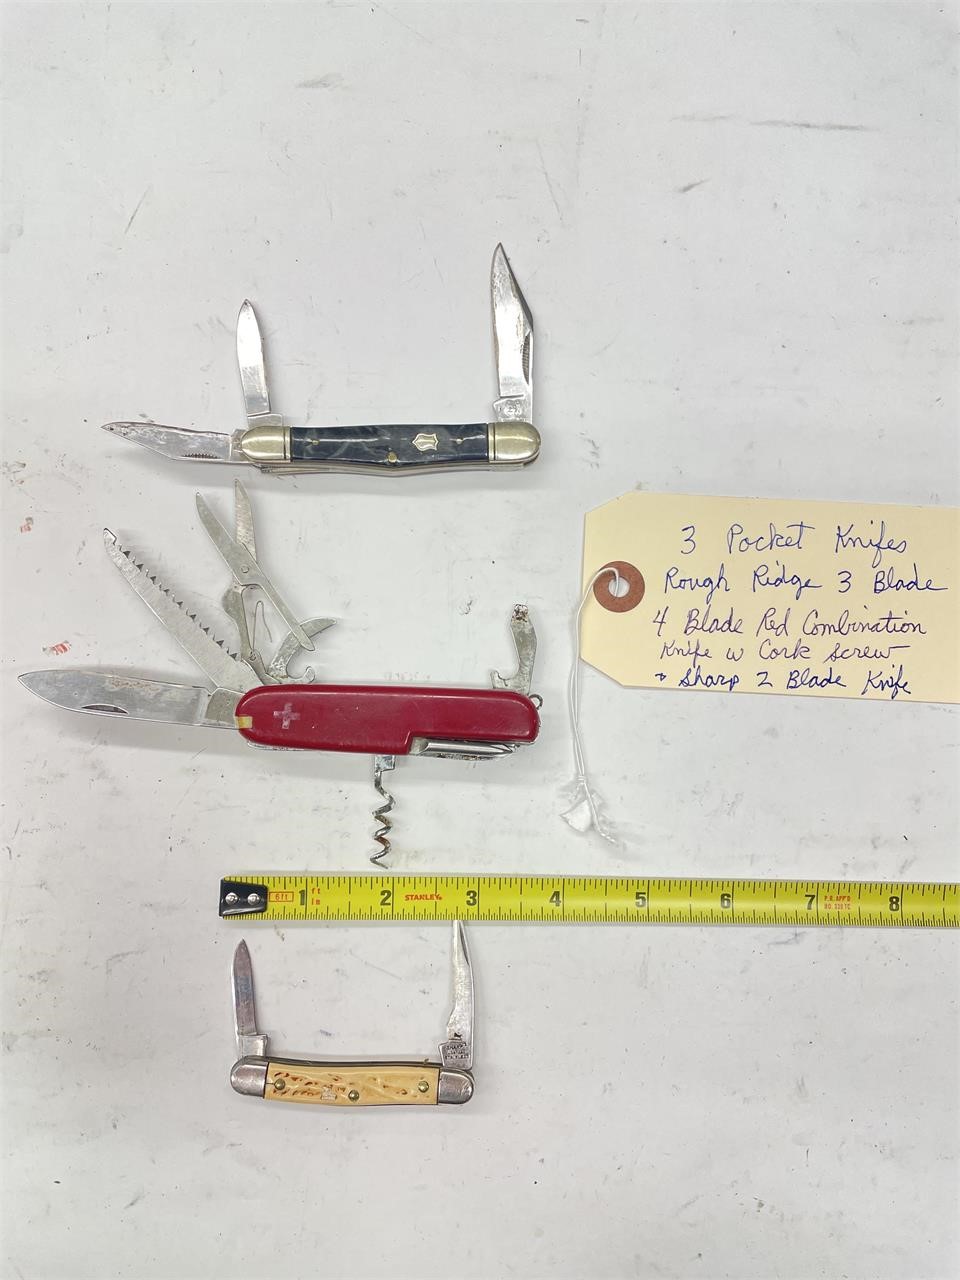 12/14/21 Online Only Knife Auction